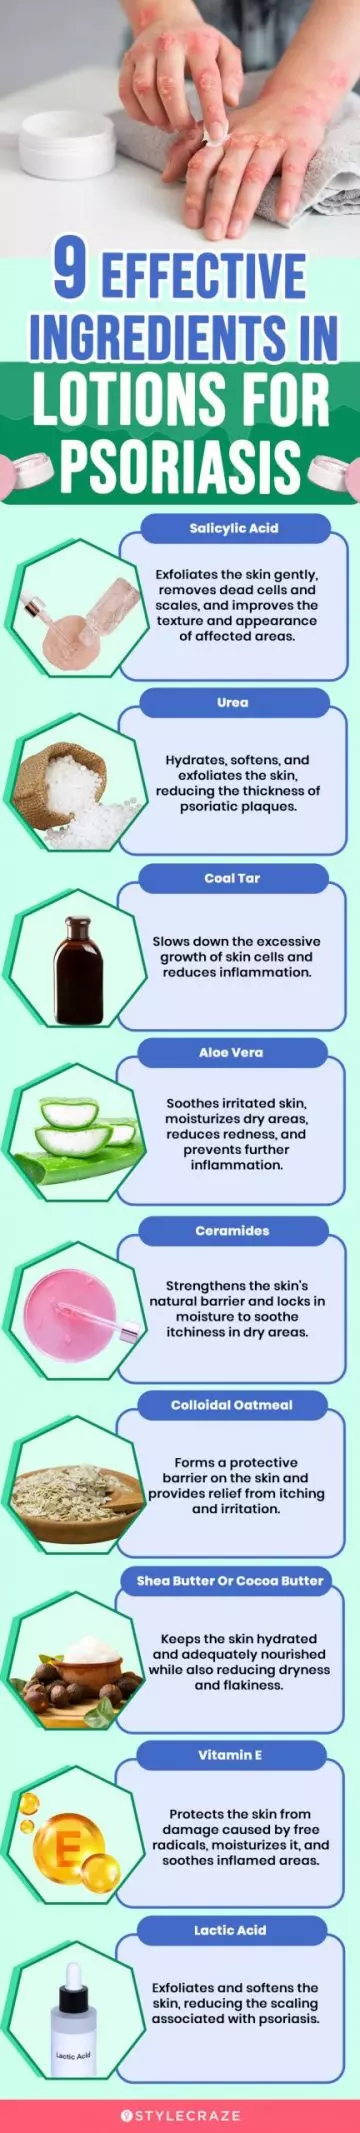 9 Effective Ingredients In Lotions For Psoriasis (infographic)